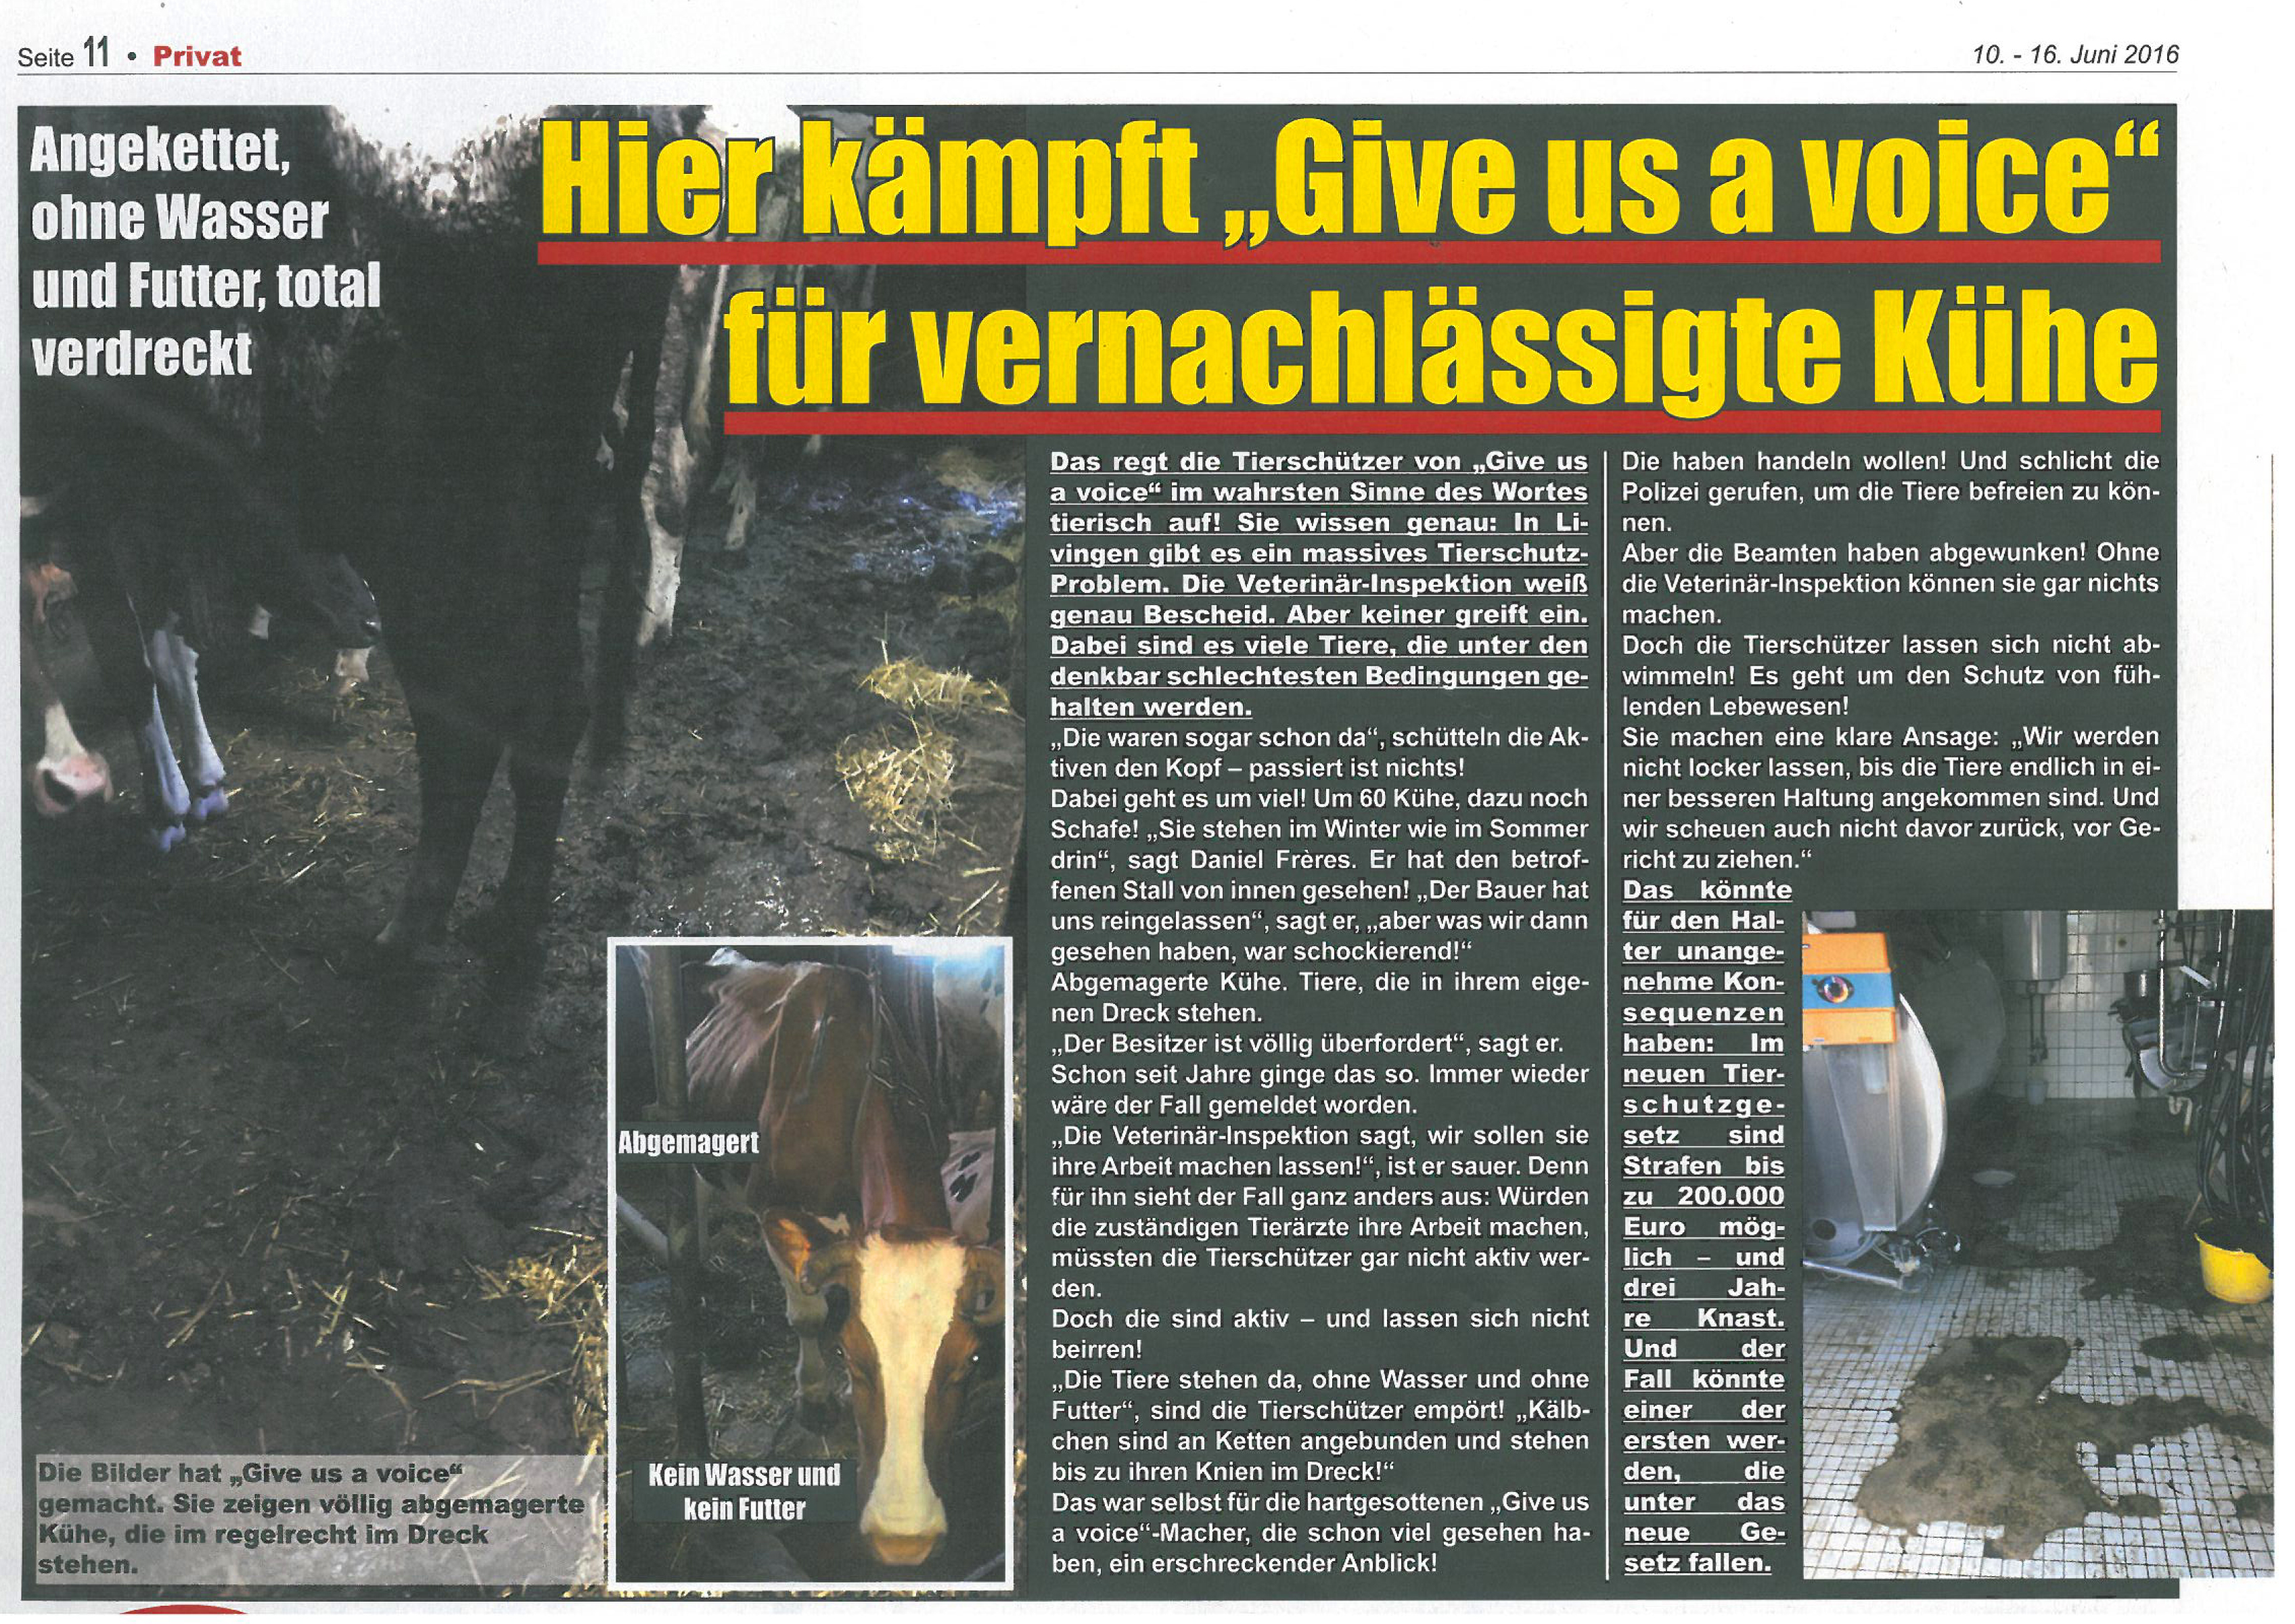 16-06-10 Privat article about cows in barn